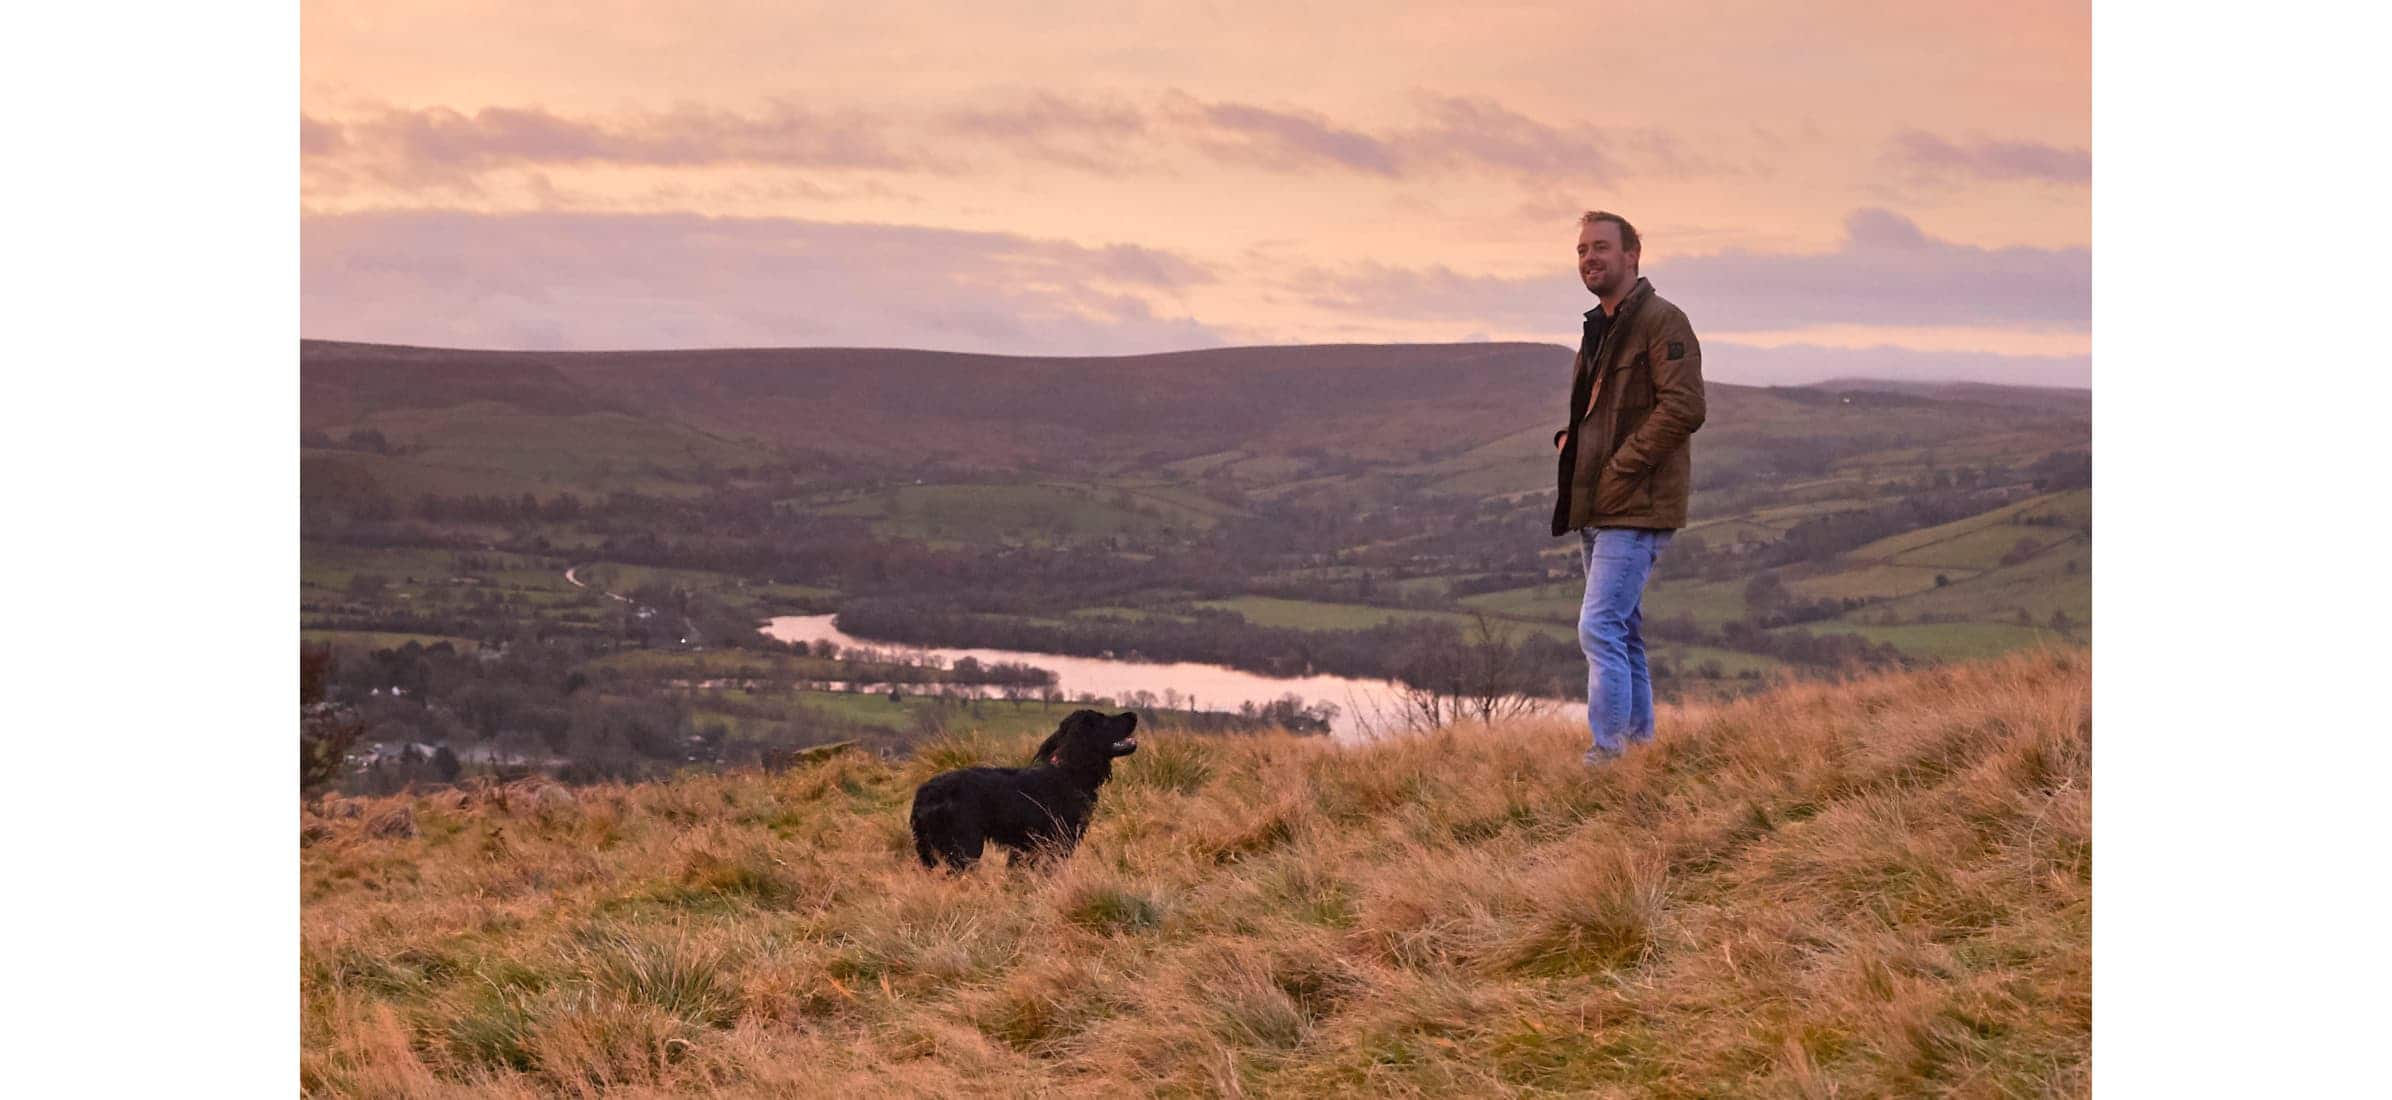 Dan Capper and his dog on a hill overlooking a river and valley.